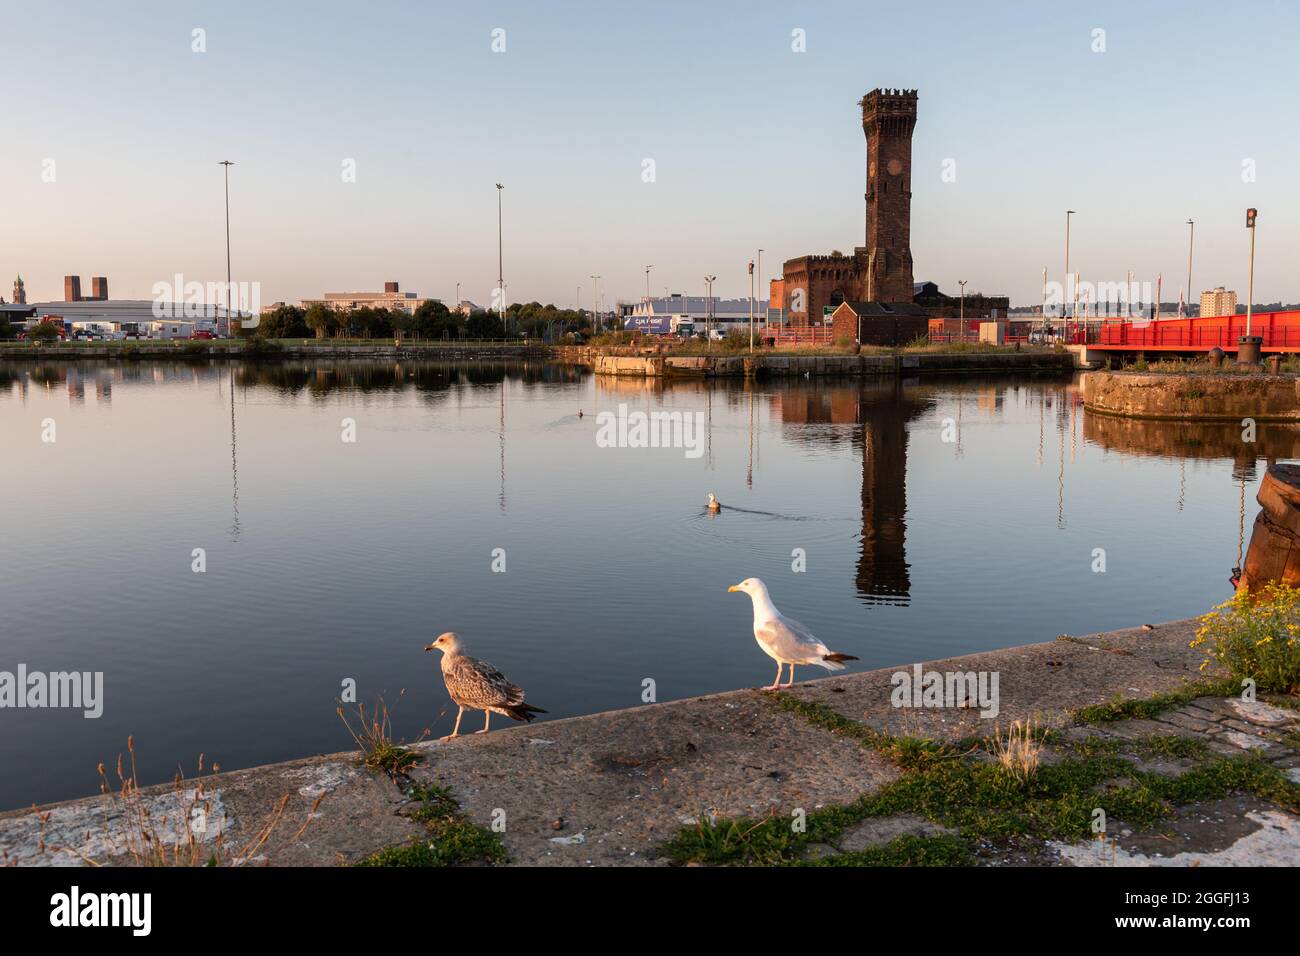 Birkenhead, UK: Alfred Dock and Central Hydraulic Tower, built in 1863 for providing power for movement of lock gates and bascule bridges. Stock Photo